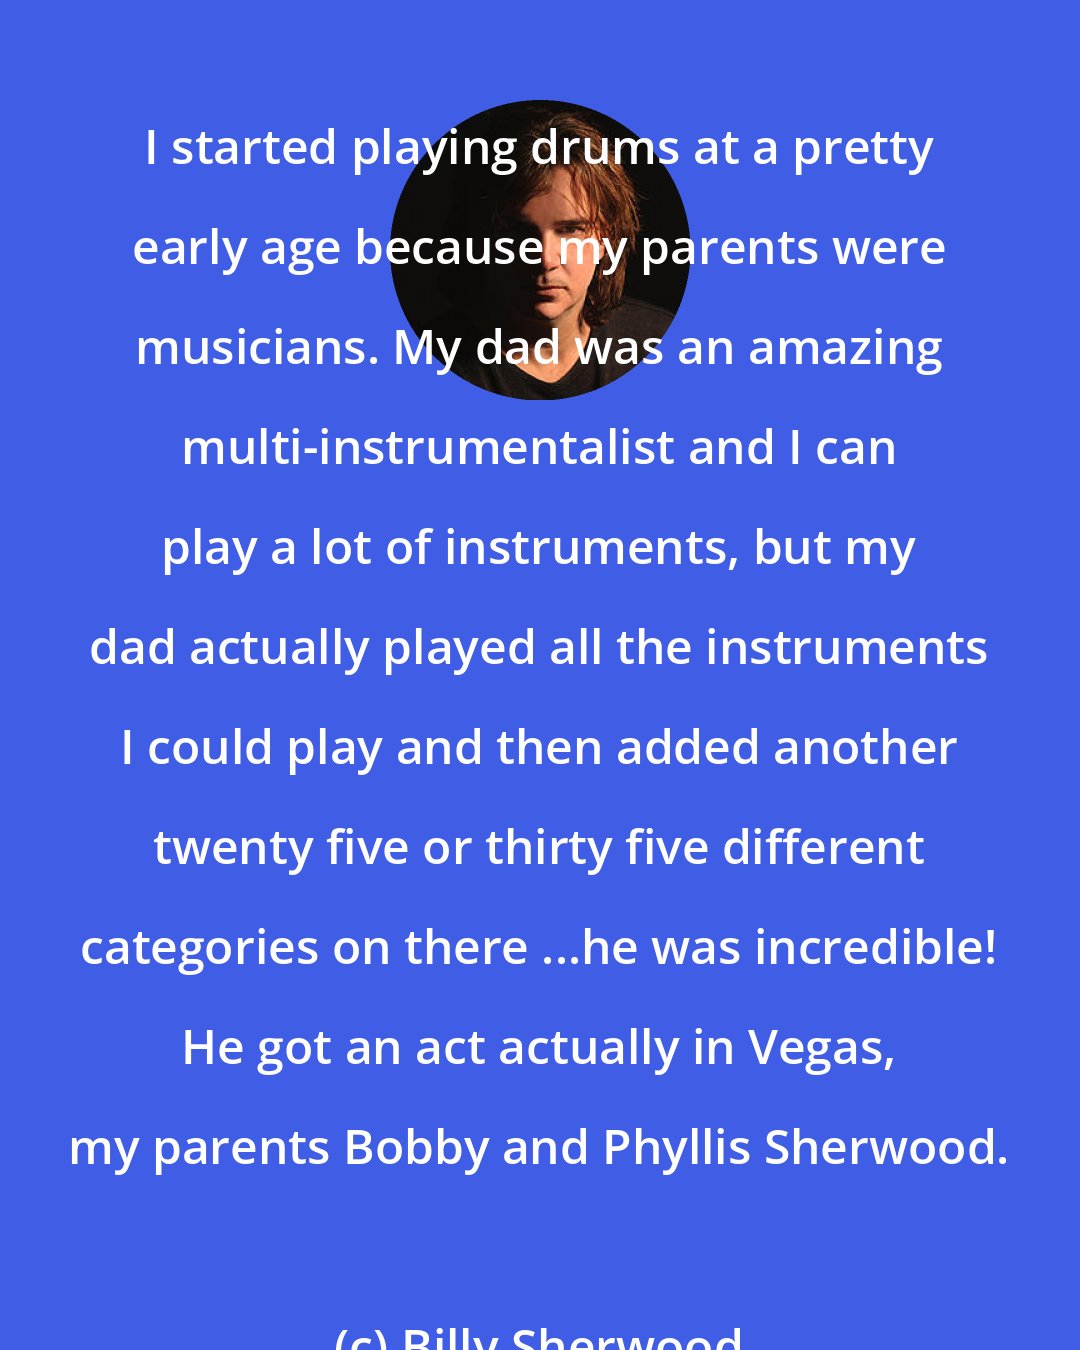 Billy Sherwood: I started playing drums at a pretty early age because my parents were musicians. My dad was an amazing multi-instrumentalist and I can play a lot of instruments, but my dad actually played all the instruments I could play and then added another twenty five or thirty five different categories on there ...he was incredible! He got an act actually in Vegas, my parents Bobby and Phyllis Sherwood.